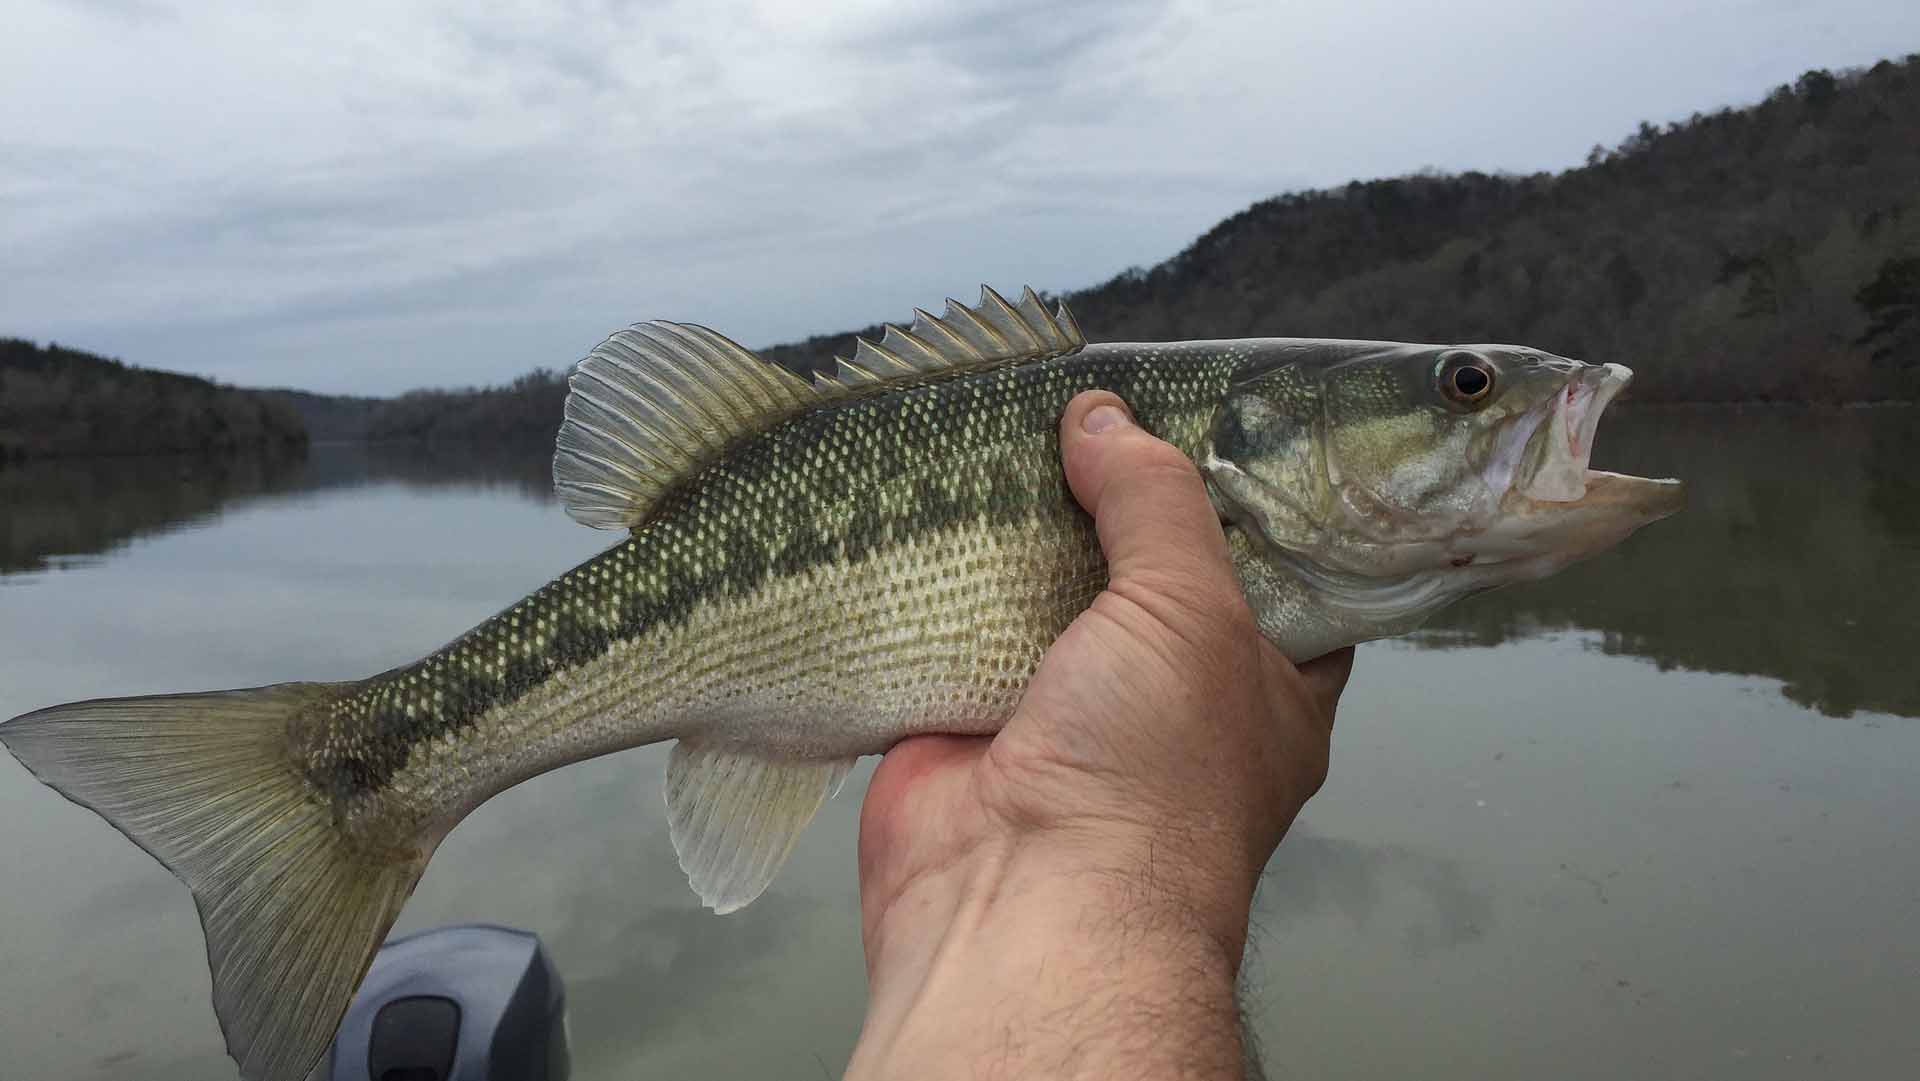 A hand holds up a spotted bass against a lake background.